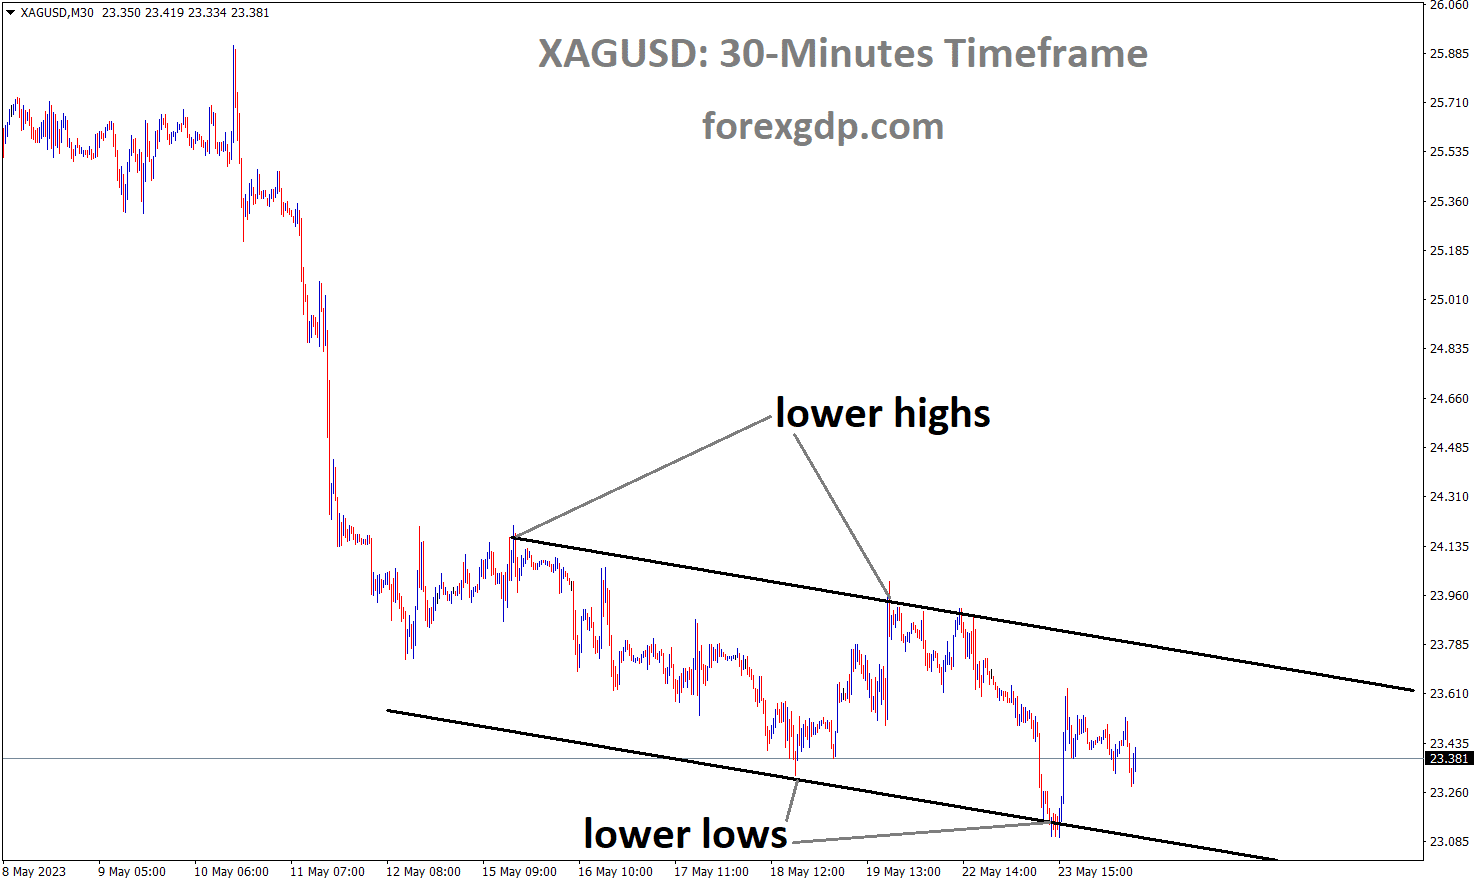 XAGUSD Silver Price is moving in the Descending channel and the market has rebounded from the lower low area of the channel